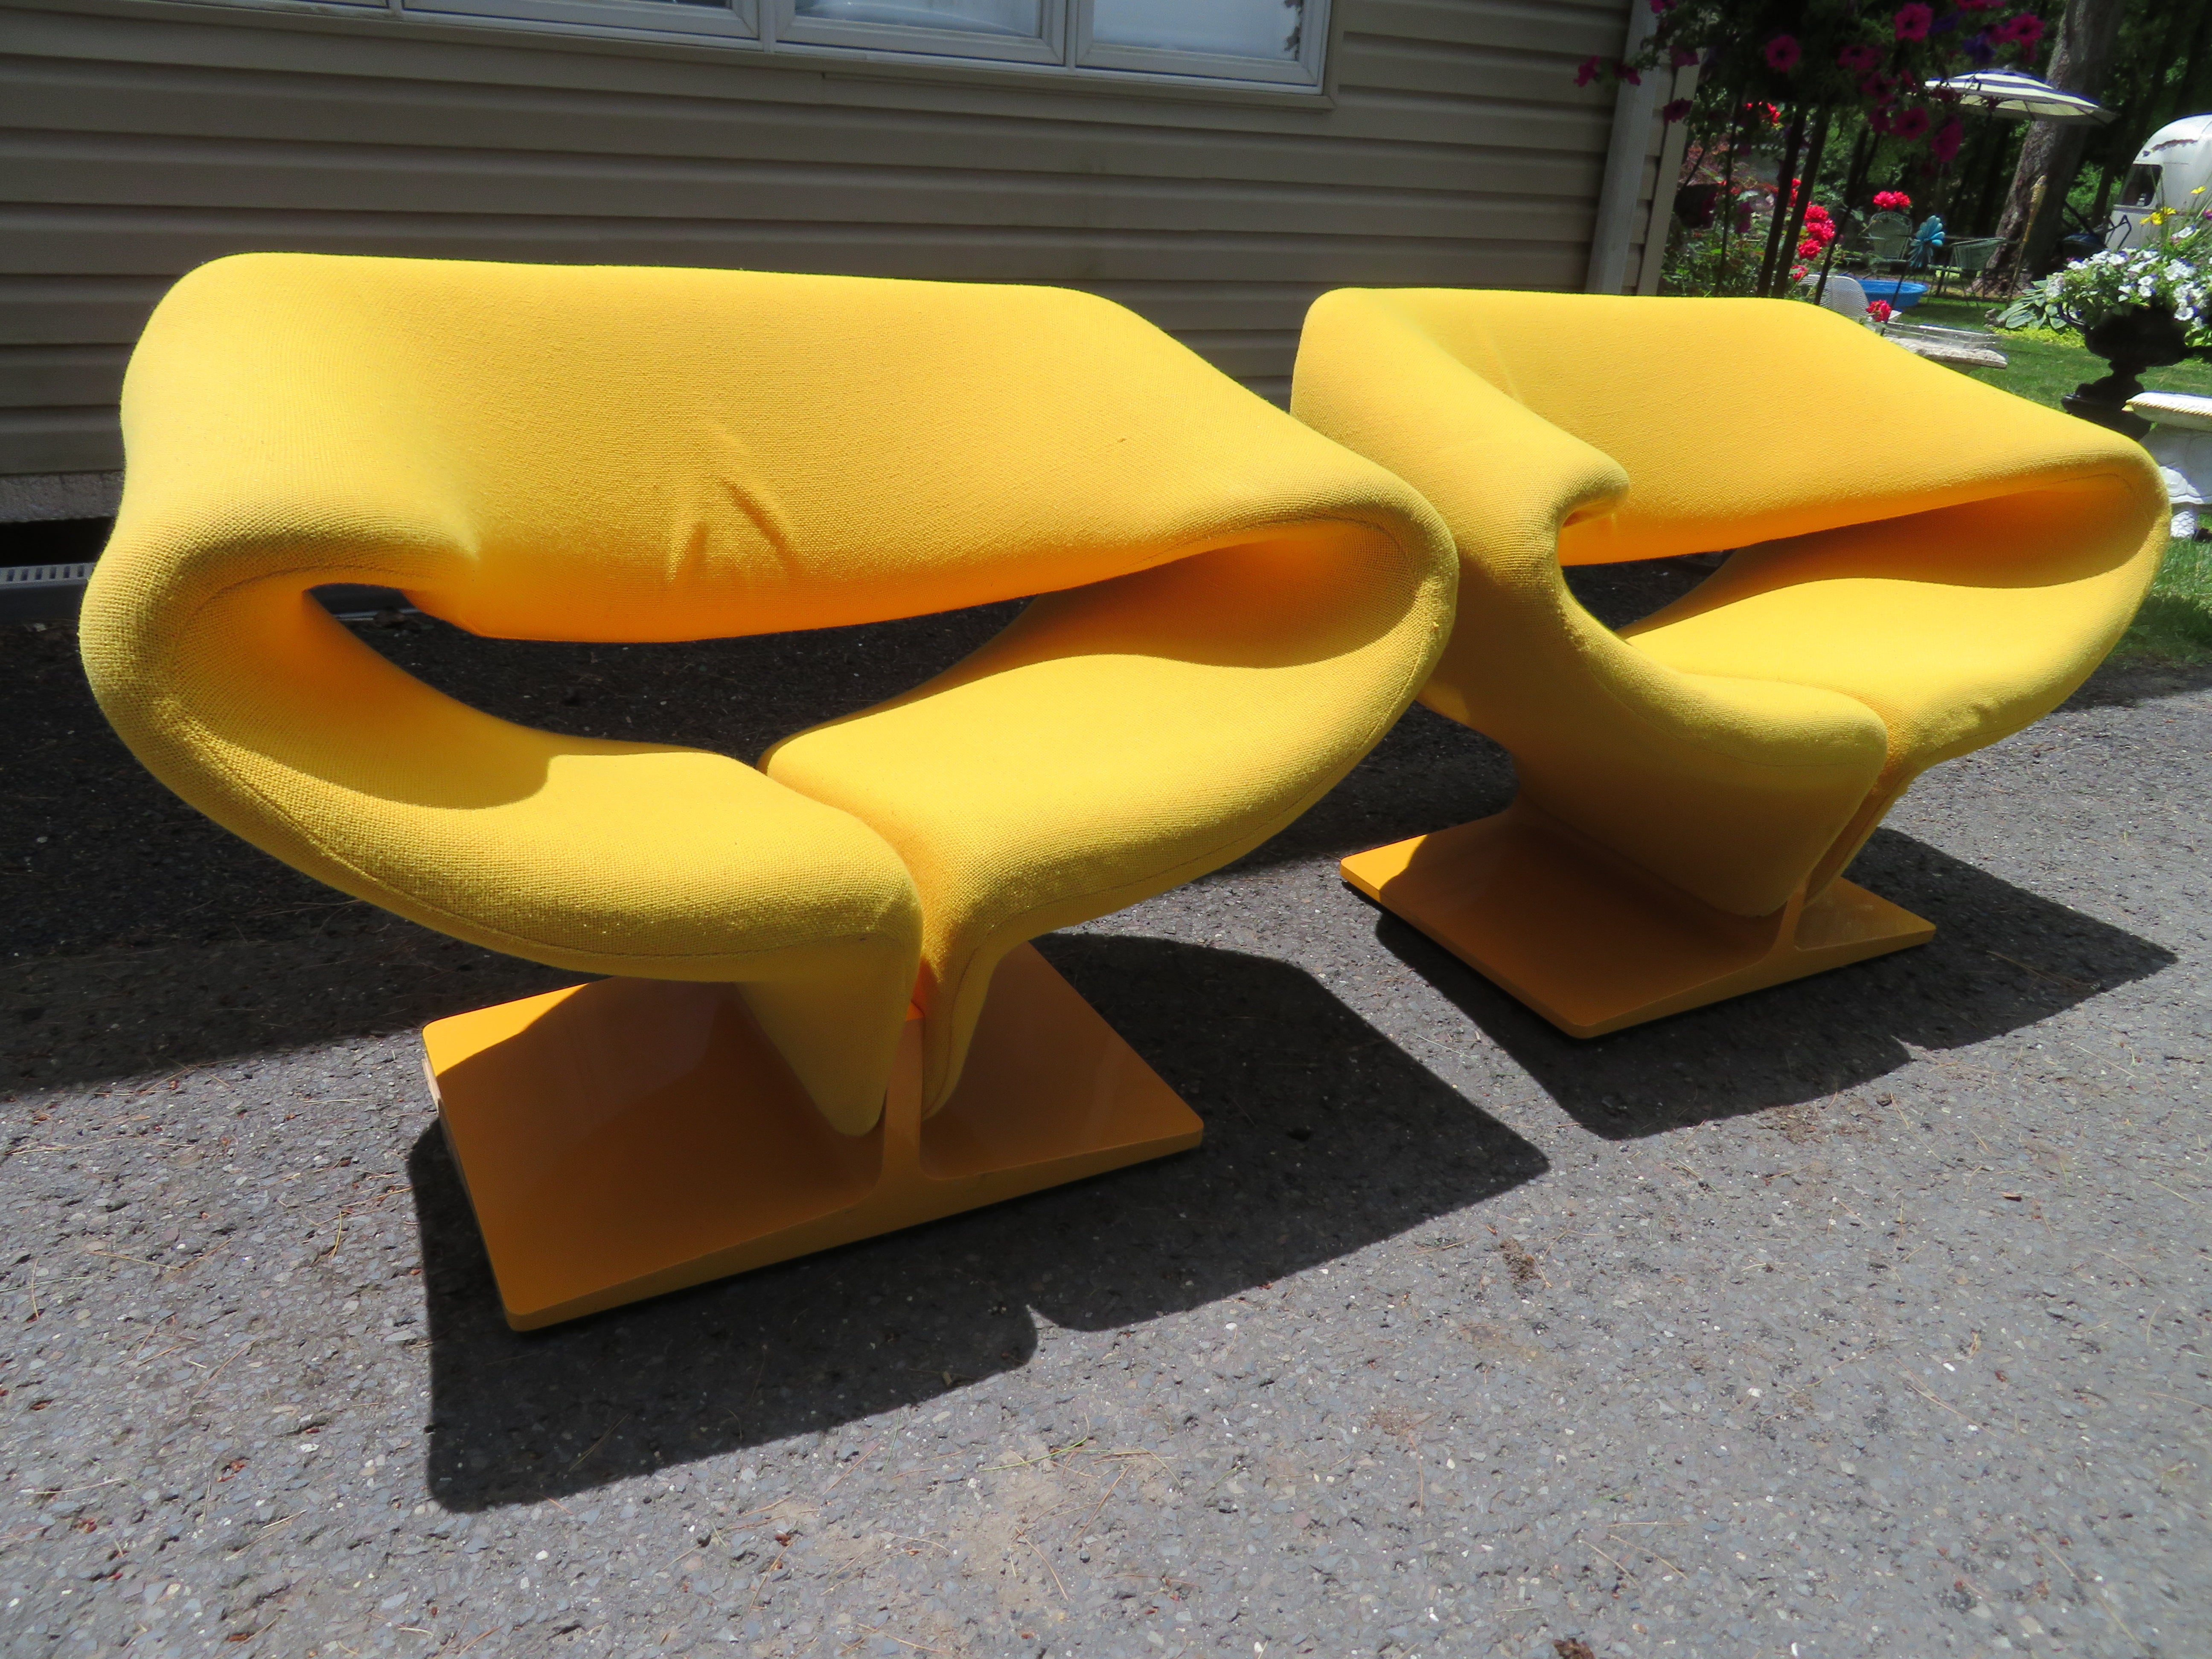 Stunning pair of vintage Pierre Paulin ribbon chairs. Manufactured by Artifort and distributed by Turner Ltd in the late 1960s. These pair retain their original yellow woven fabric in very nice condition. The yellow lacquered bases are also in